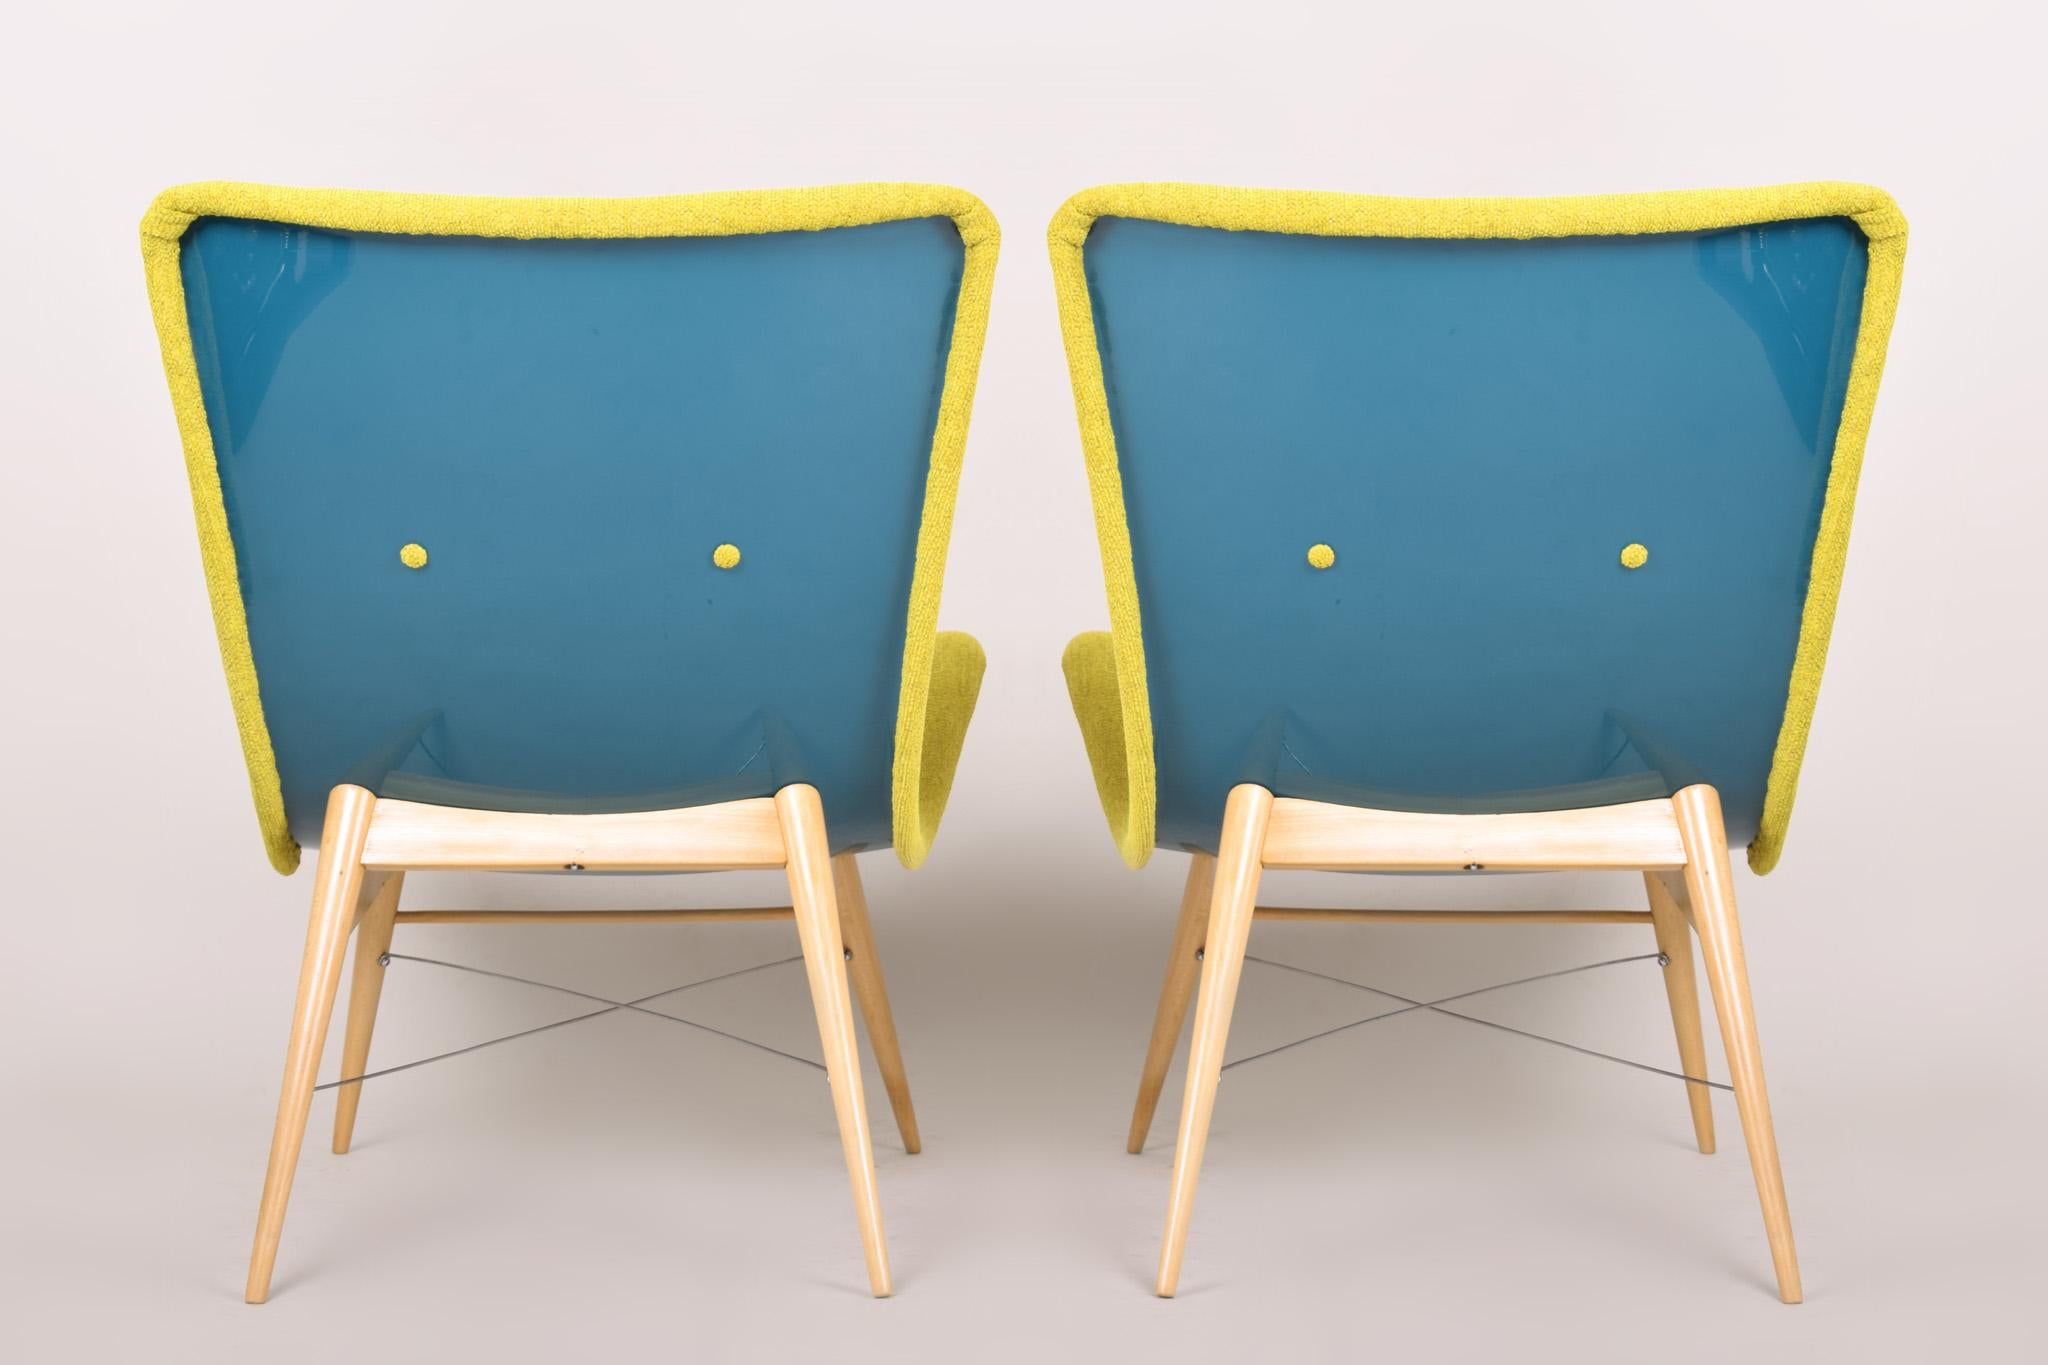 Fabric 20th Century, Green Pair of Beech Armchairs, Czechia, 1950s, Completely Restored